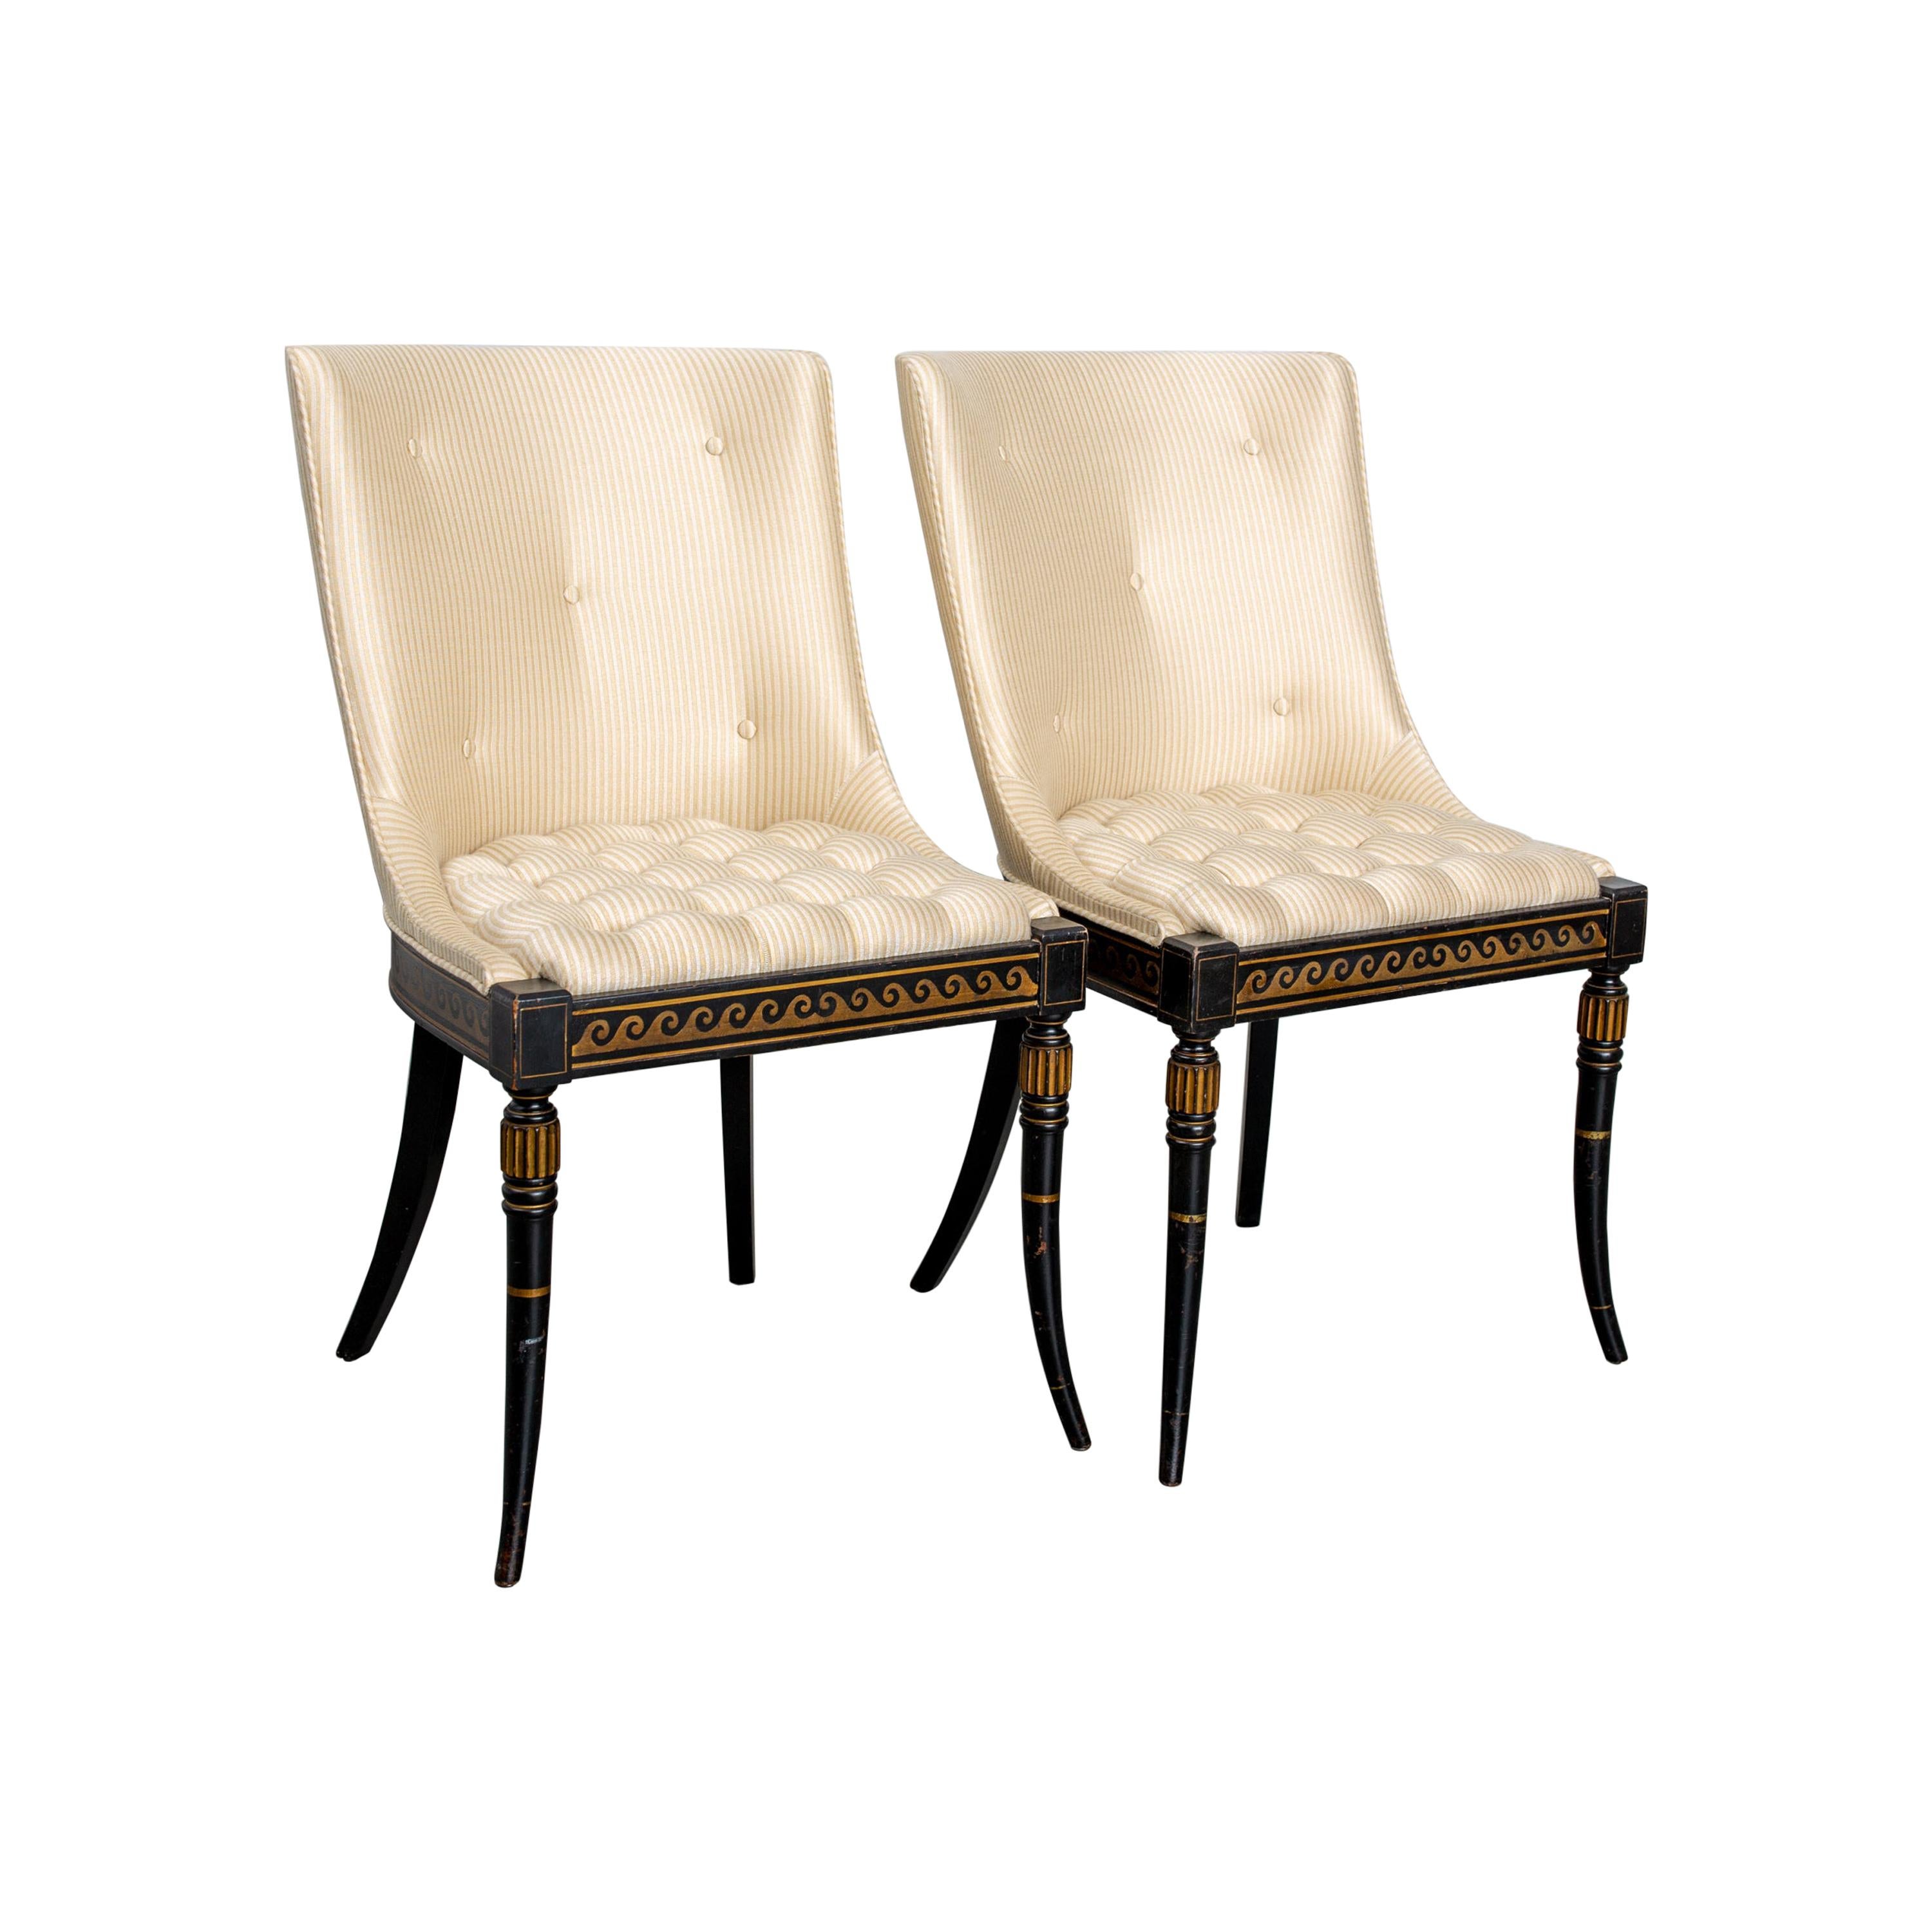 Pair of Regency Style Button-Tufted Side Chairs